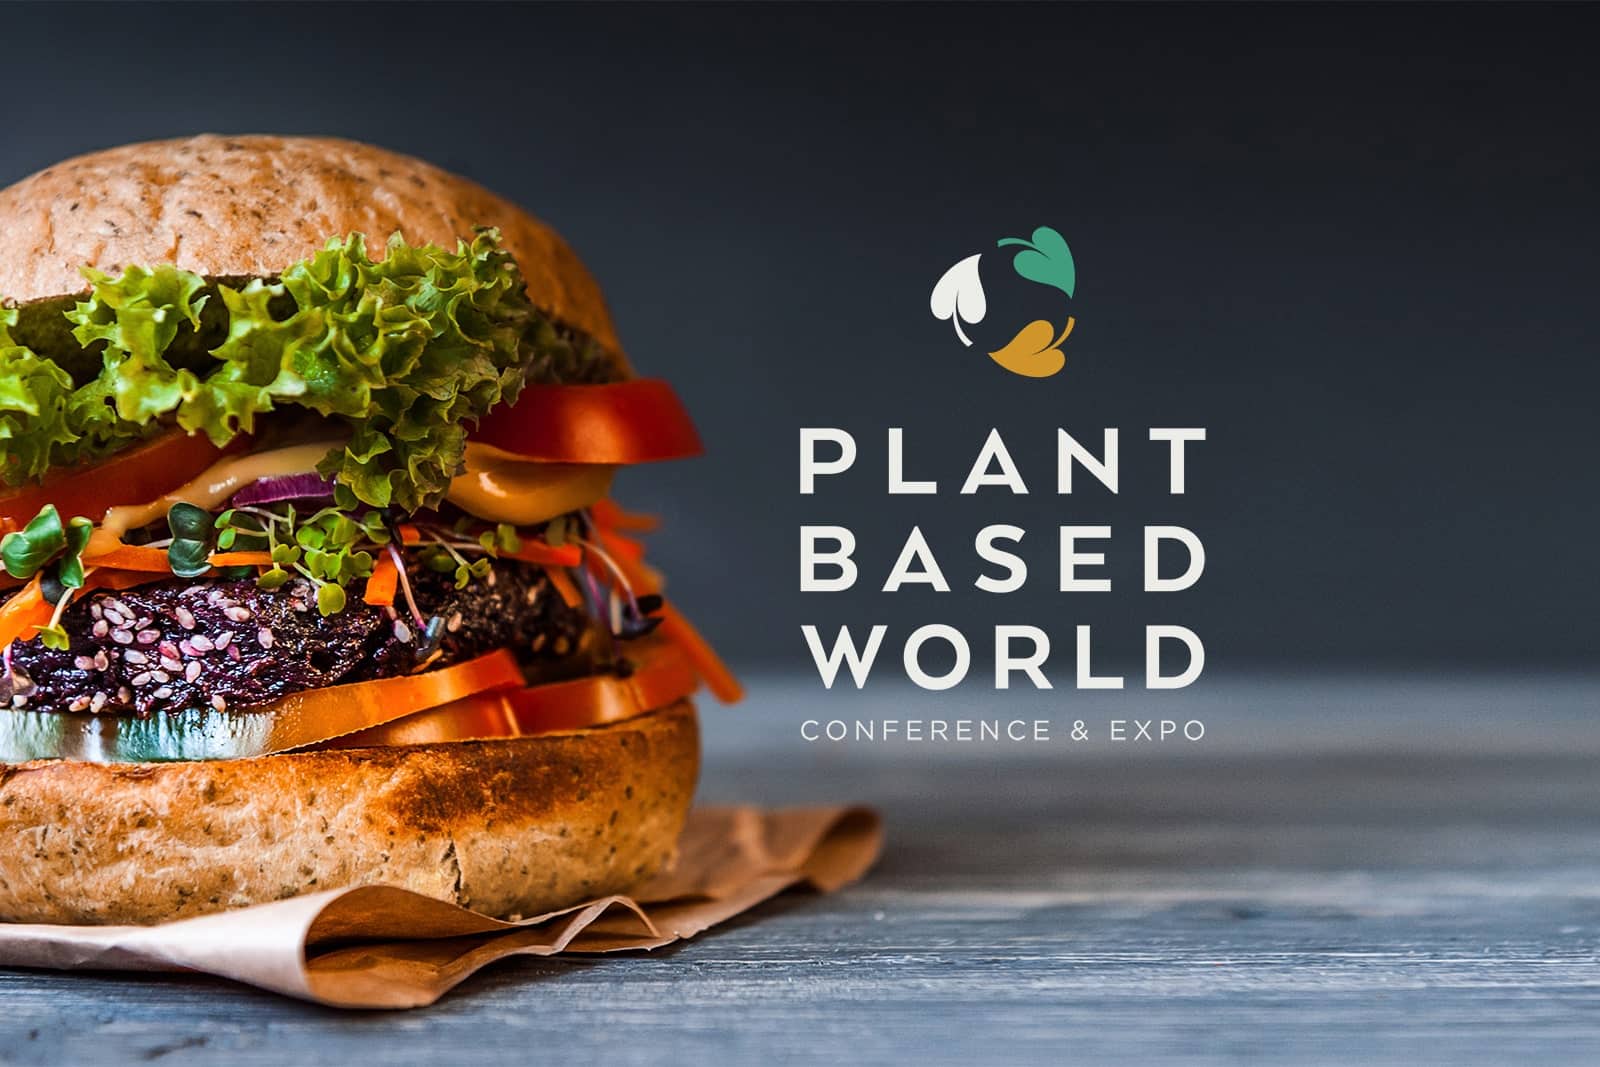 Meet us at the Plant Based World Expo